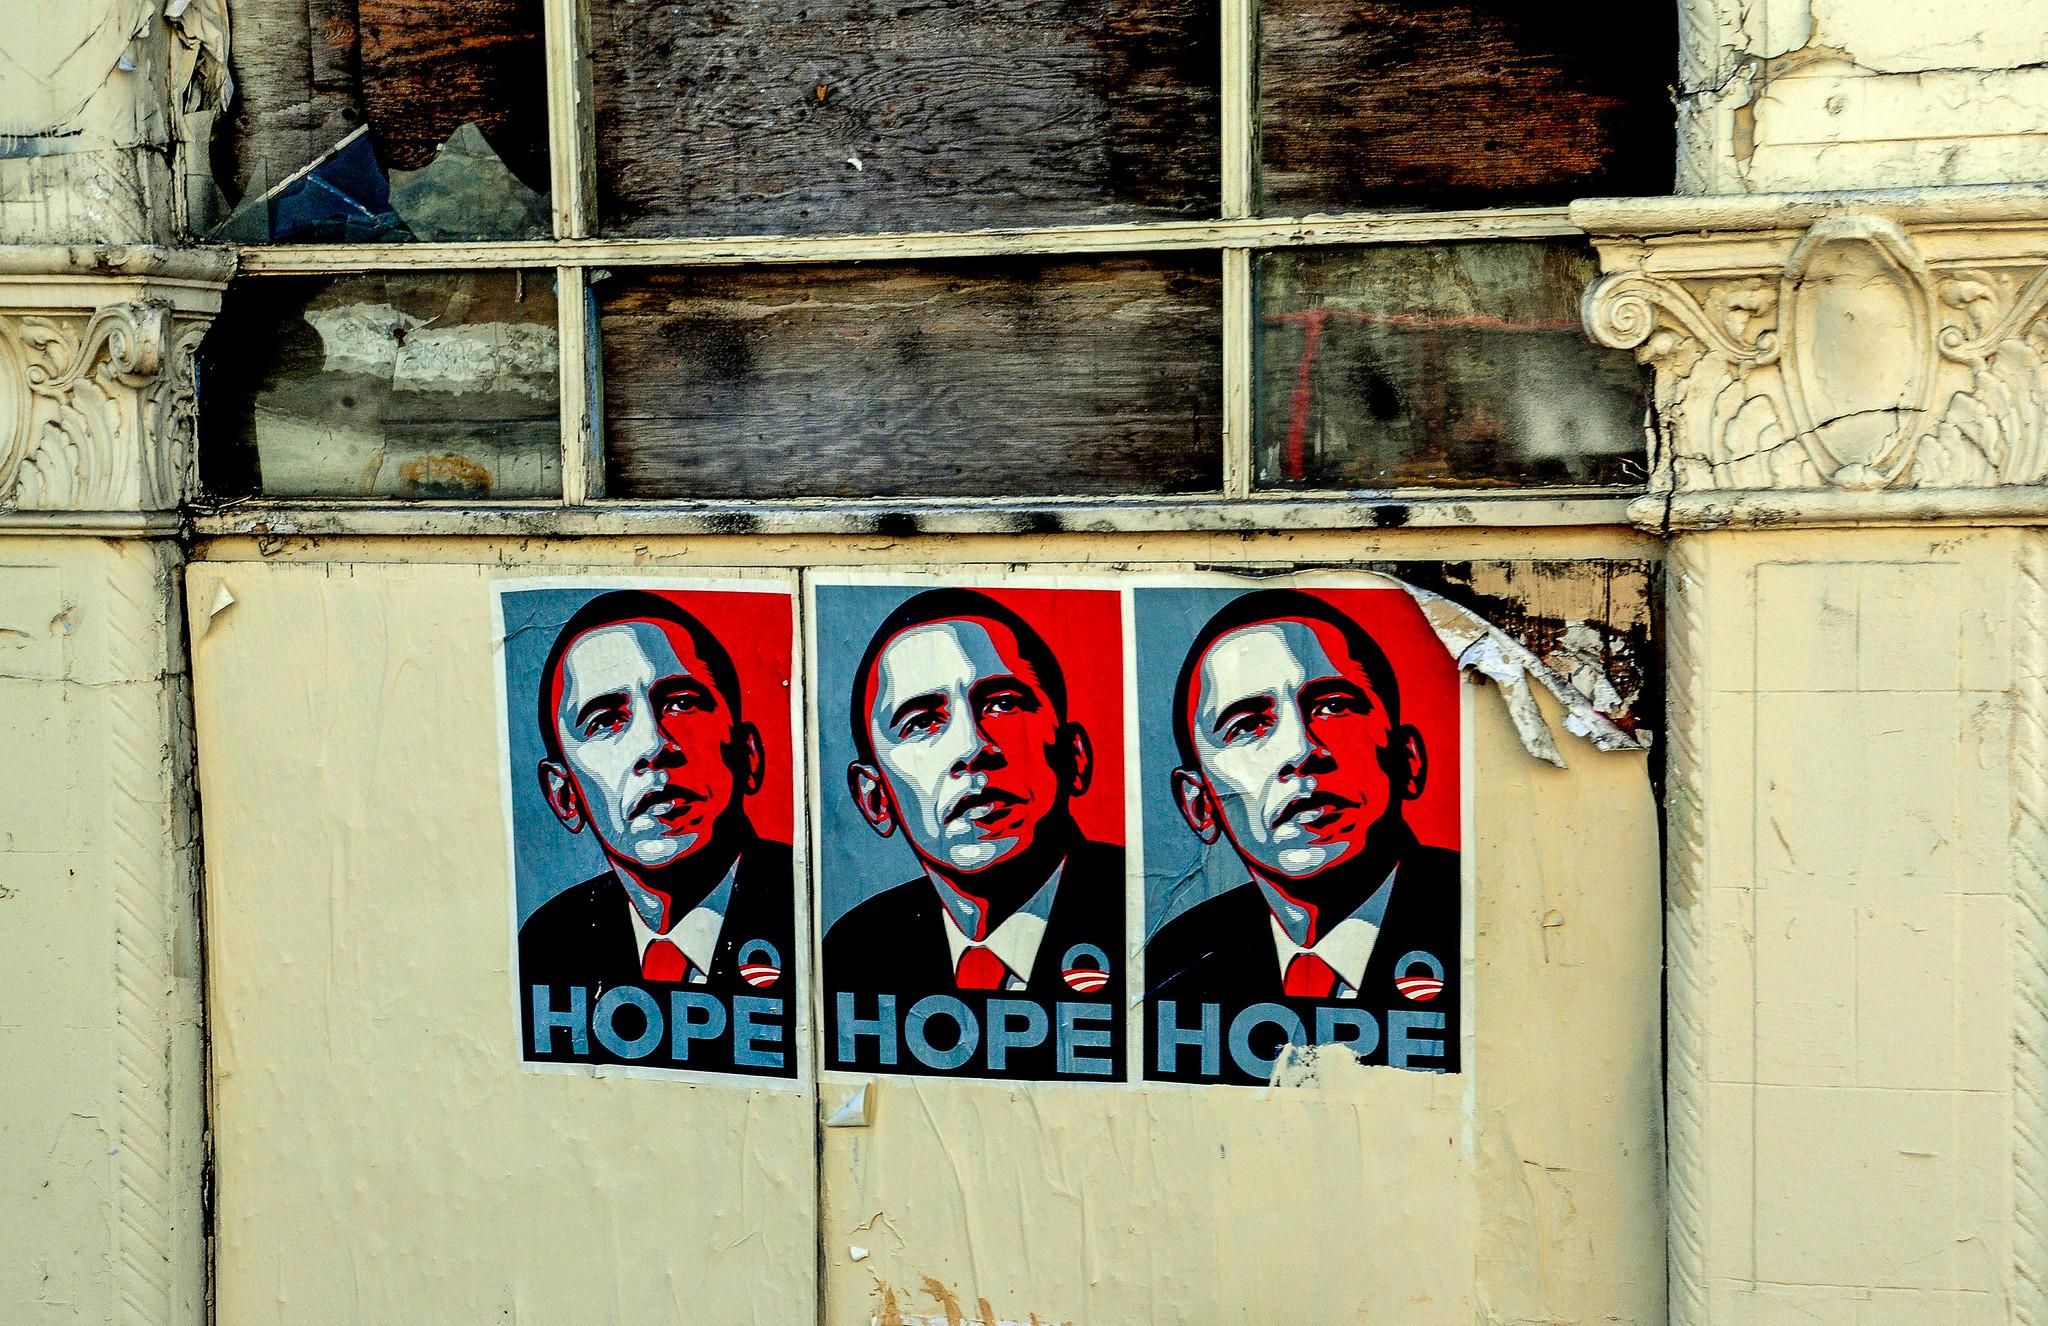 It holds that Obama promised “Hope and Change” but instead delivered boilerplate centrism that produced a disillusioned working-class, paving the way for a right-wing populist resurgence. (Photo: Kent Kanouse/flickr/cc)